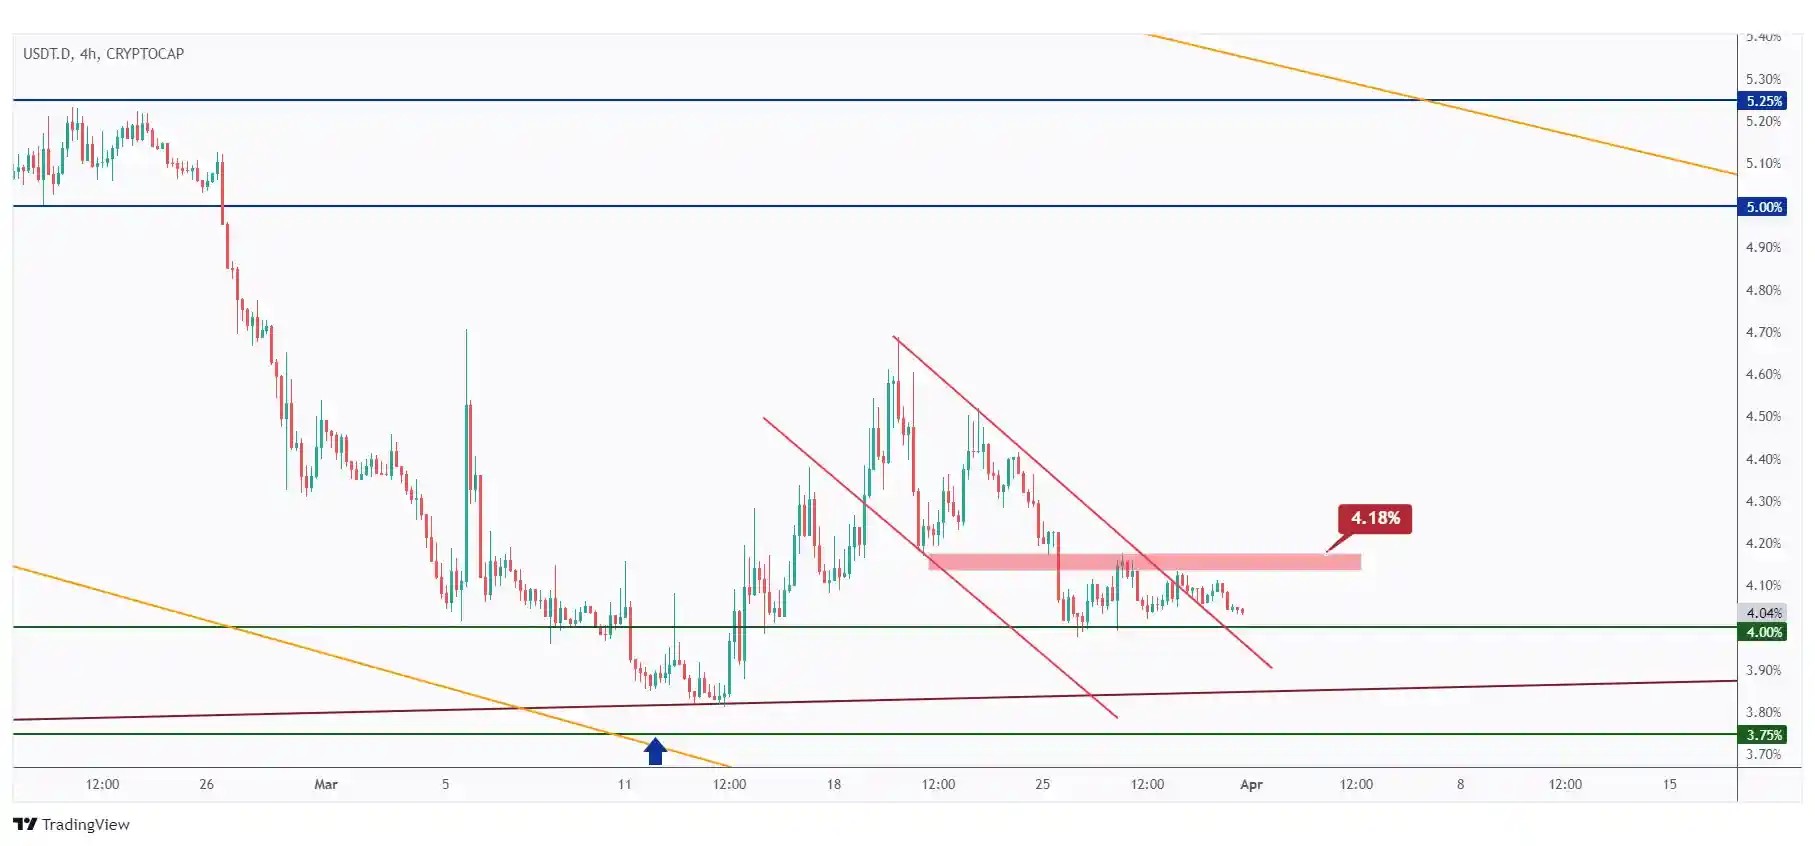 USDT.D 4H showing that the last major high at 4.18% that we need a break above for the bulls to take over.